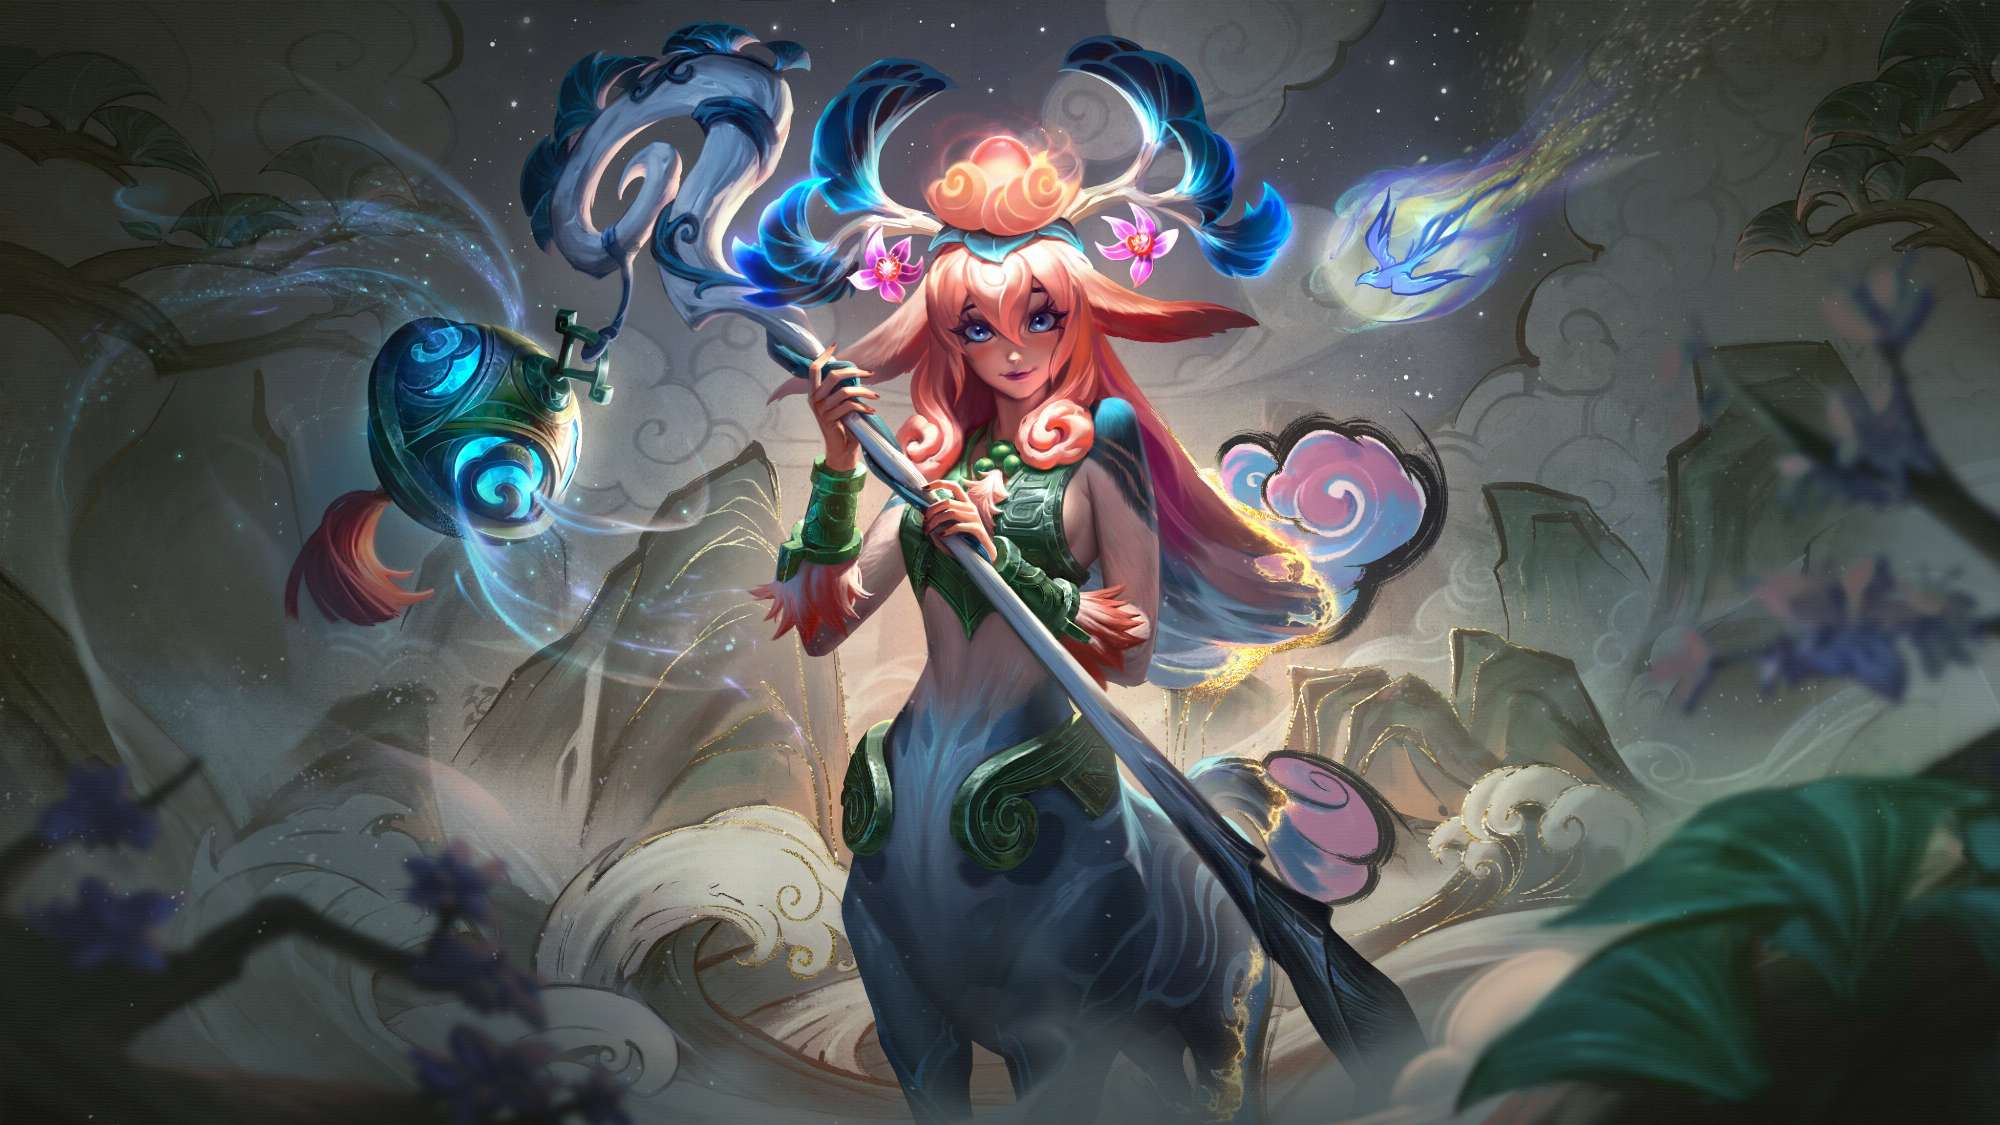 Revealing new skins in the theme of Son Hai Map and even ‘Myth’ for Leona